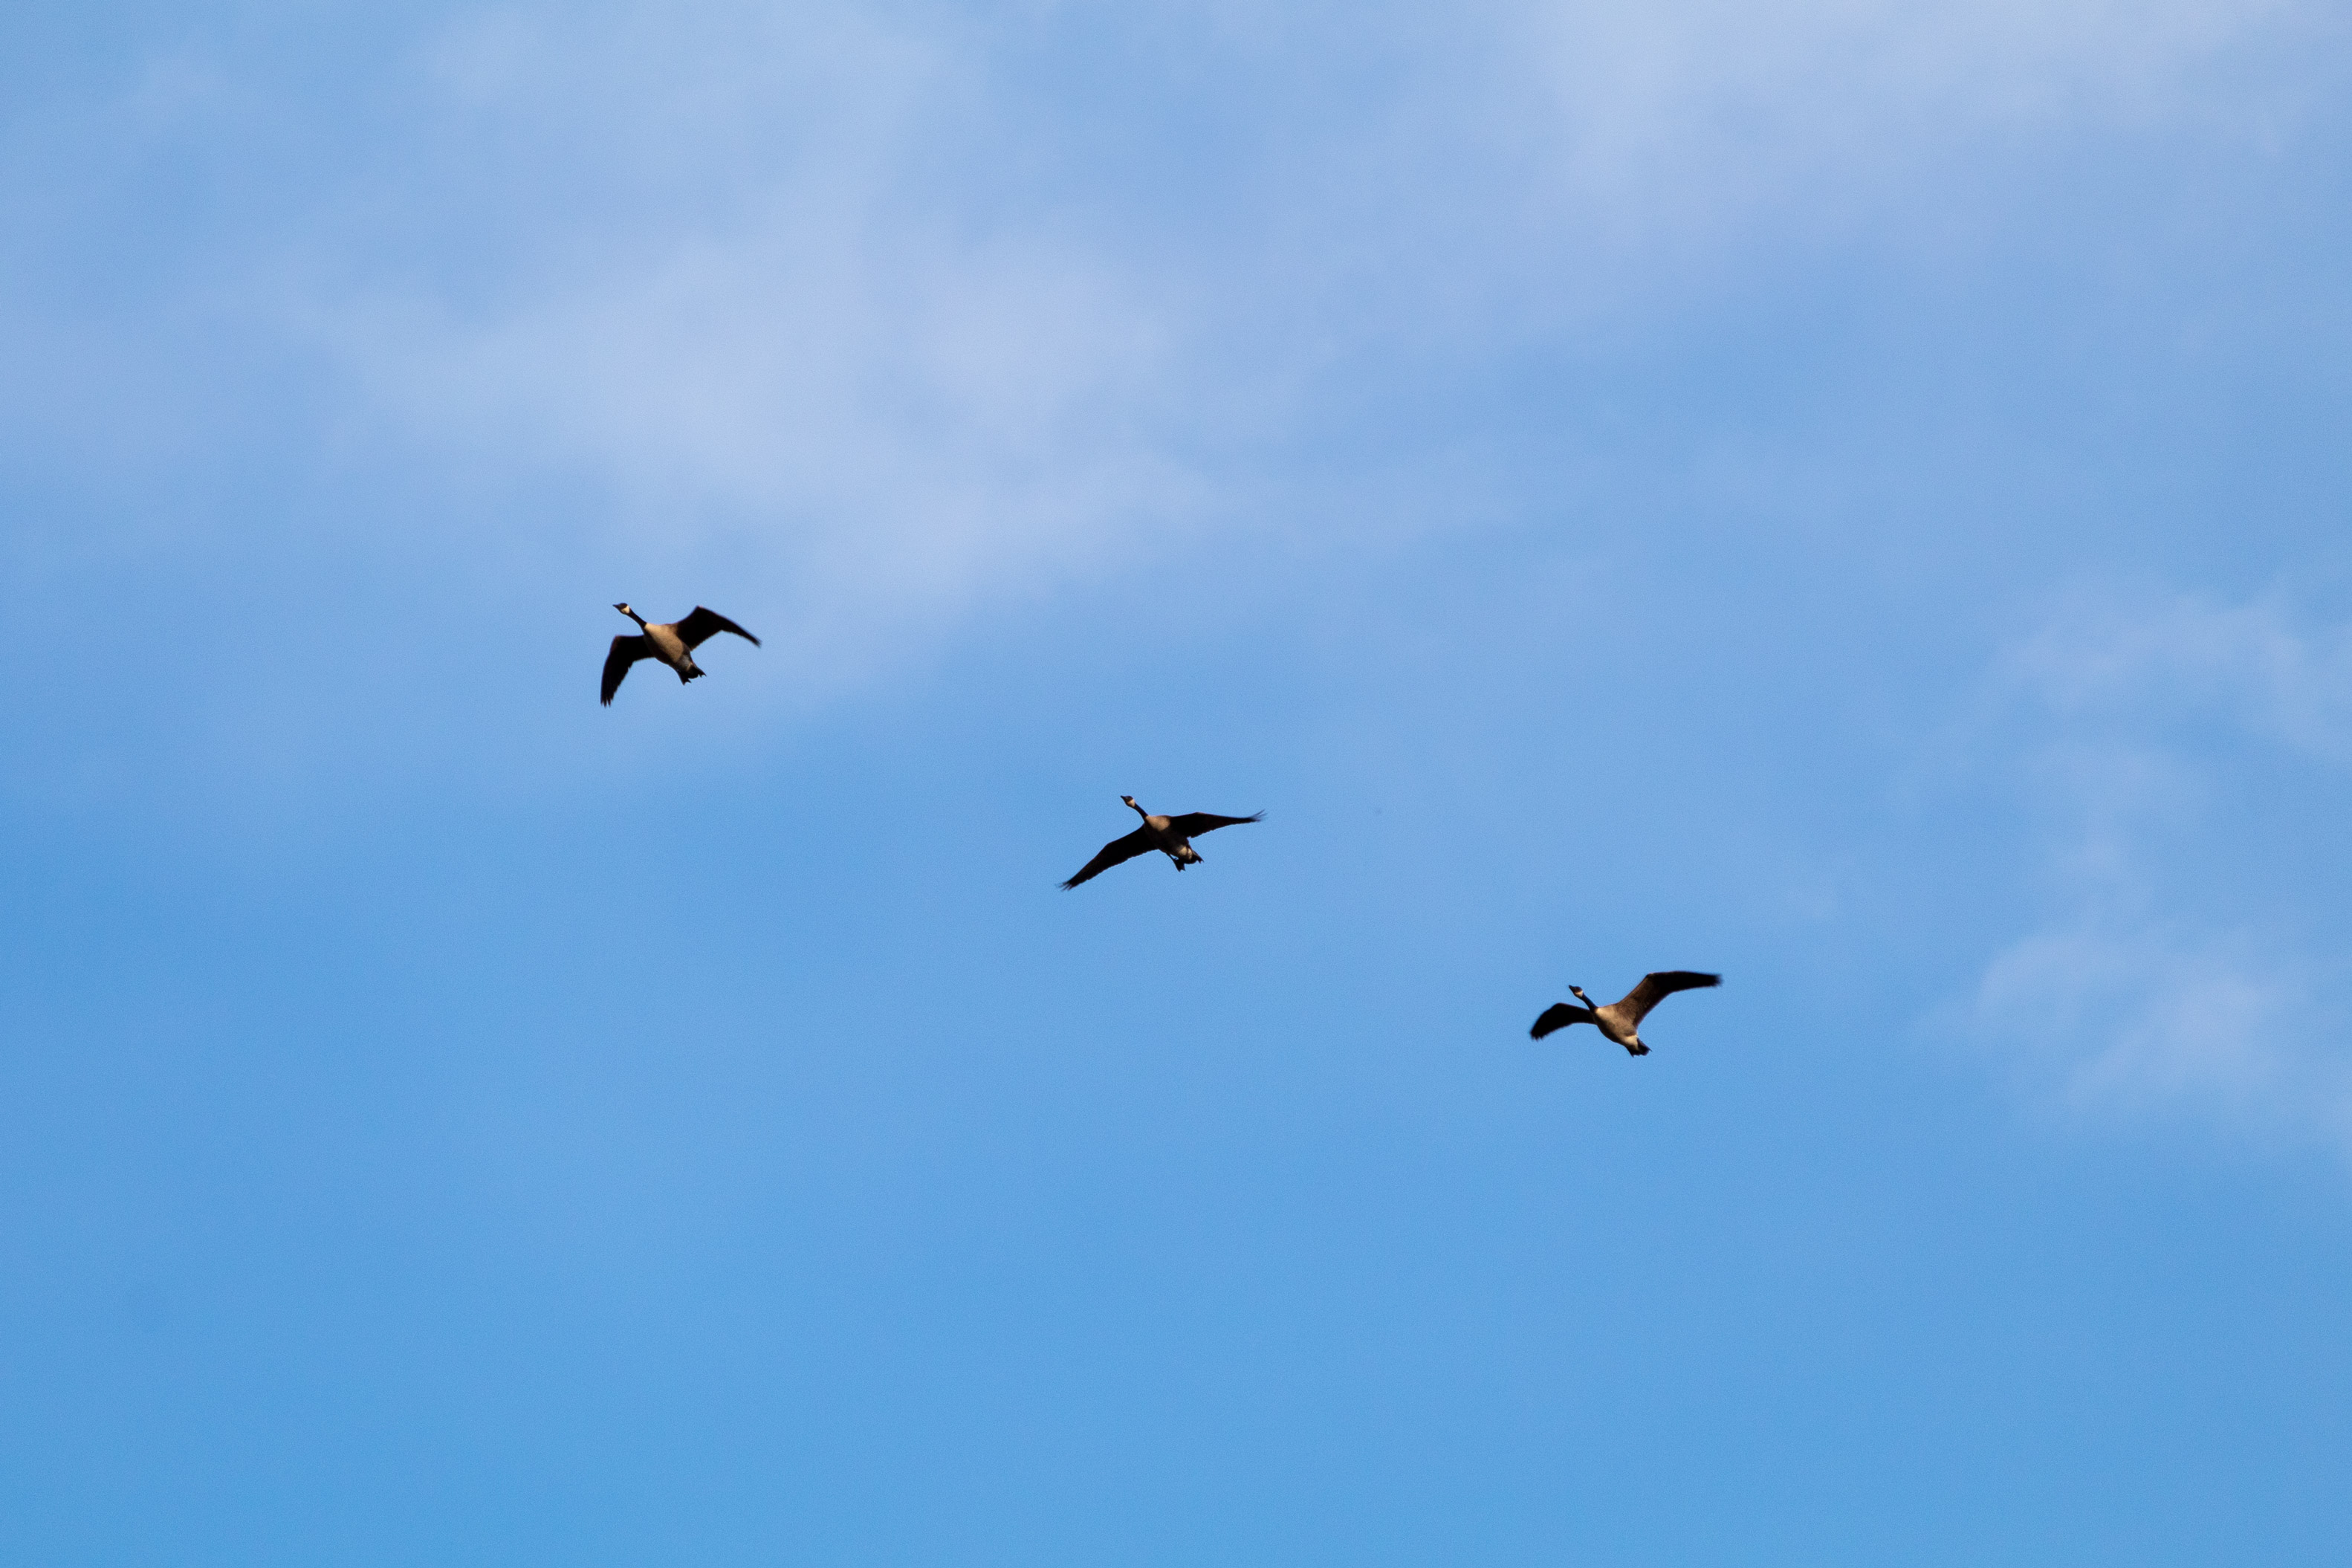 Three geese flying in the blue sky with some faint wispy clouds